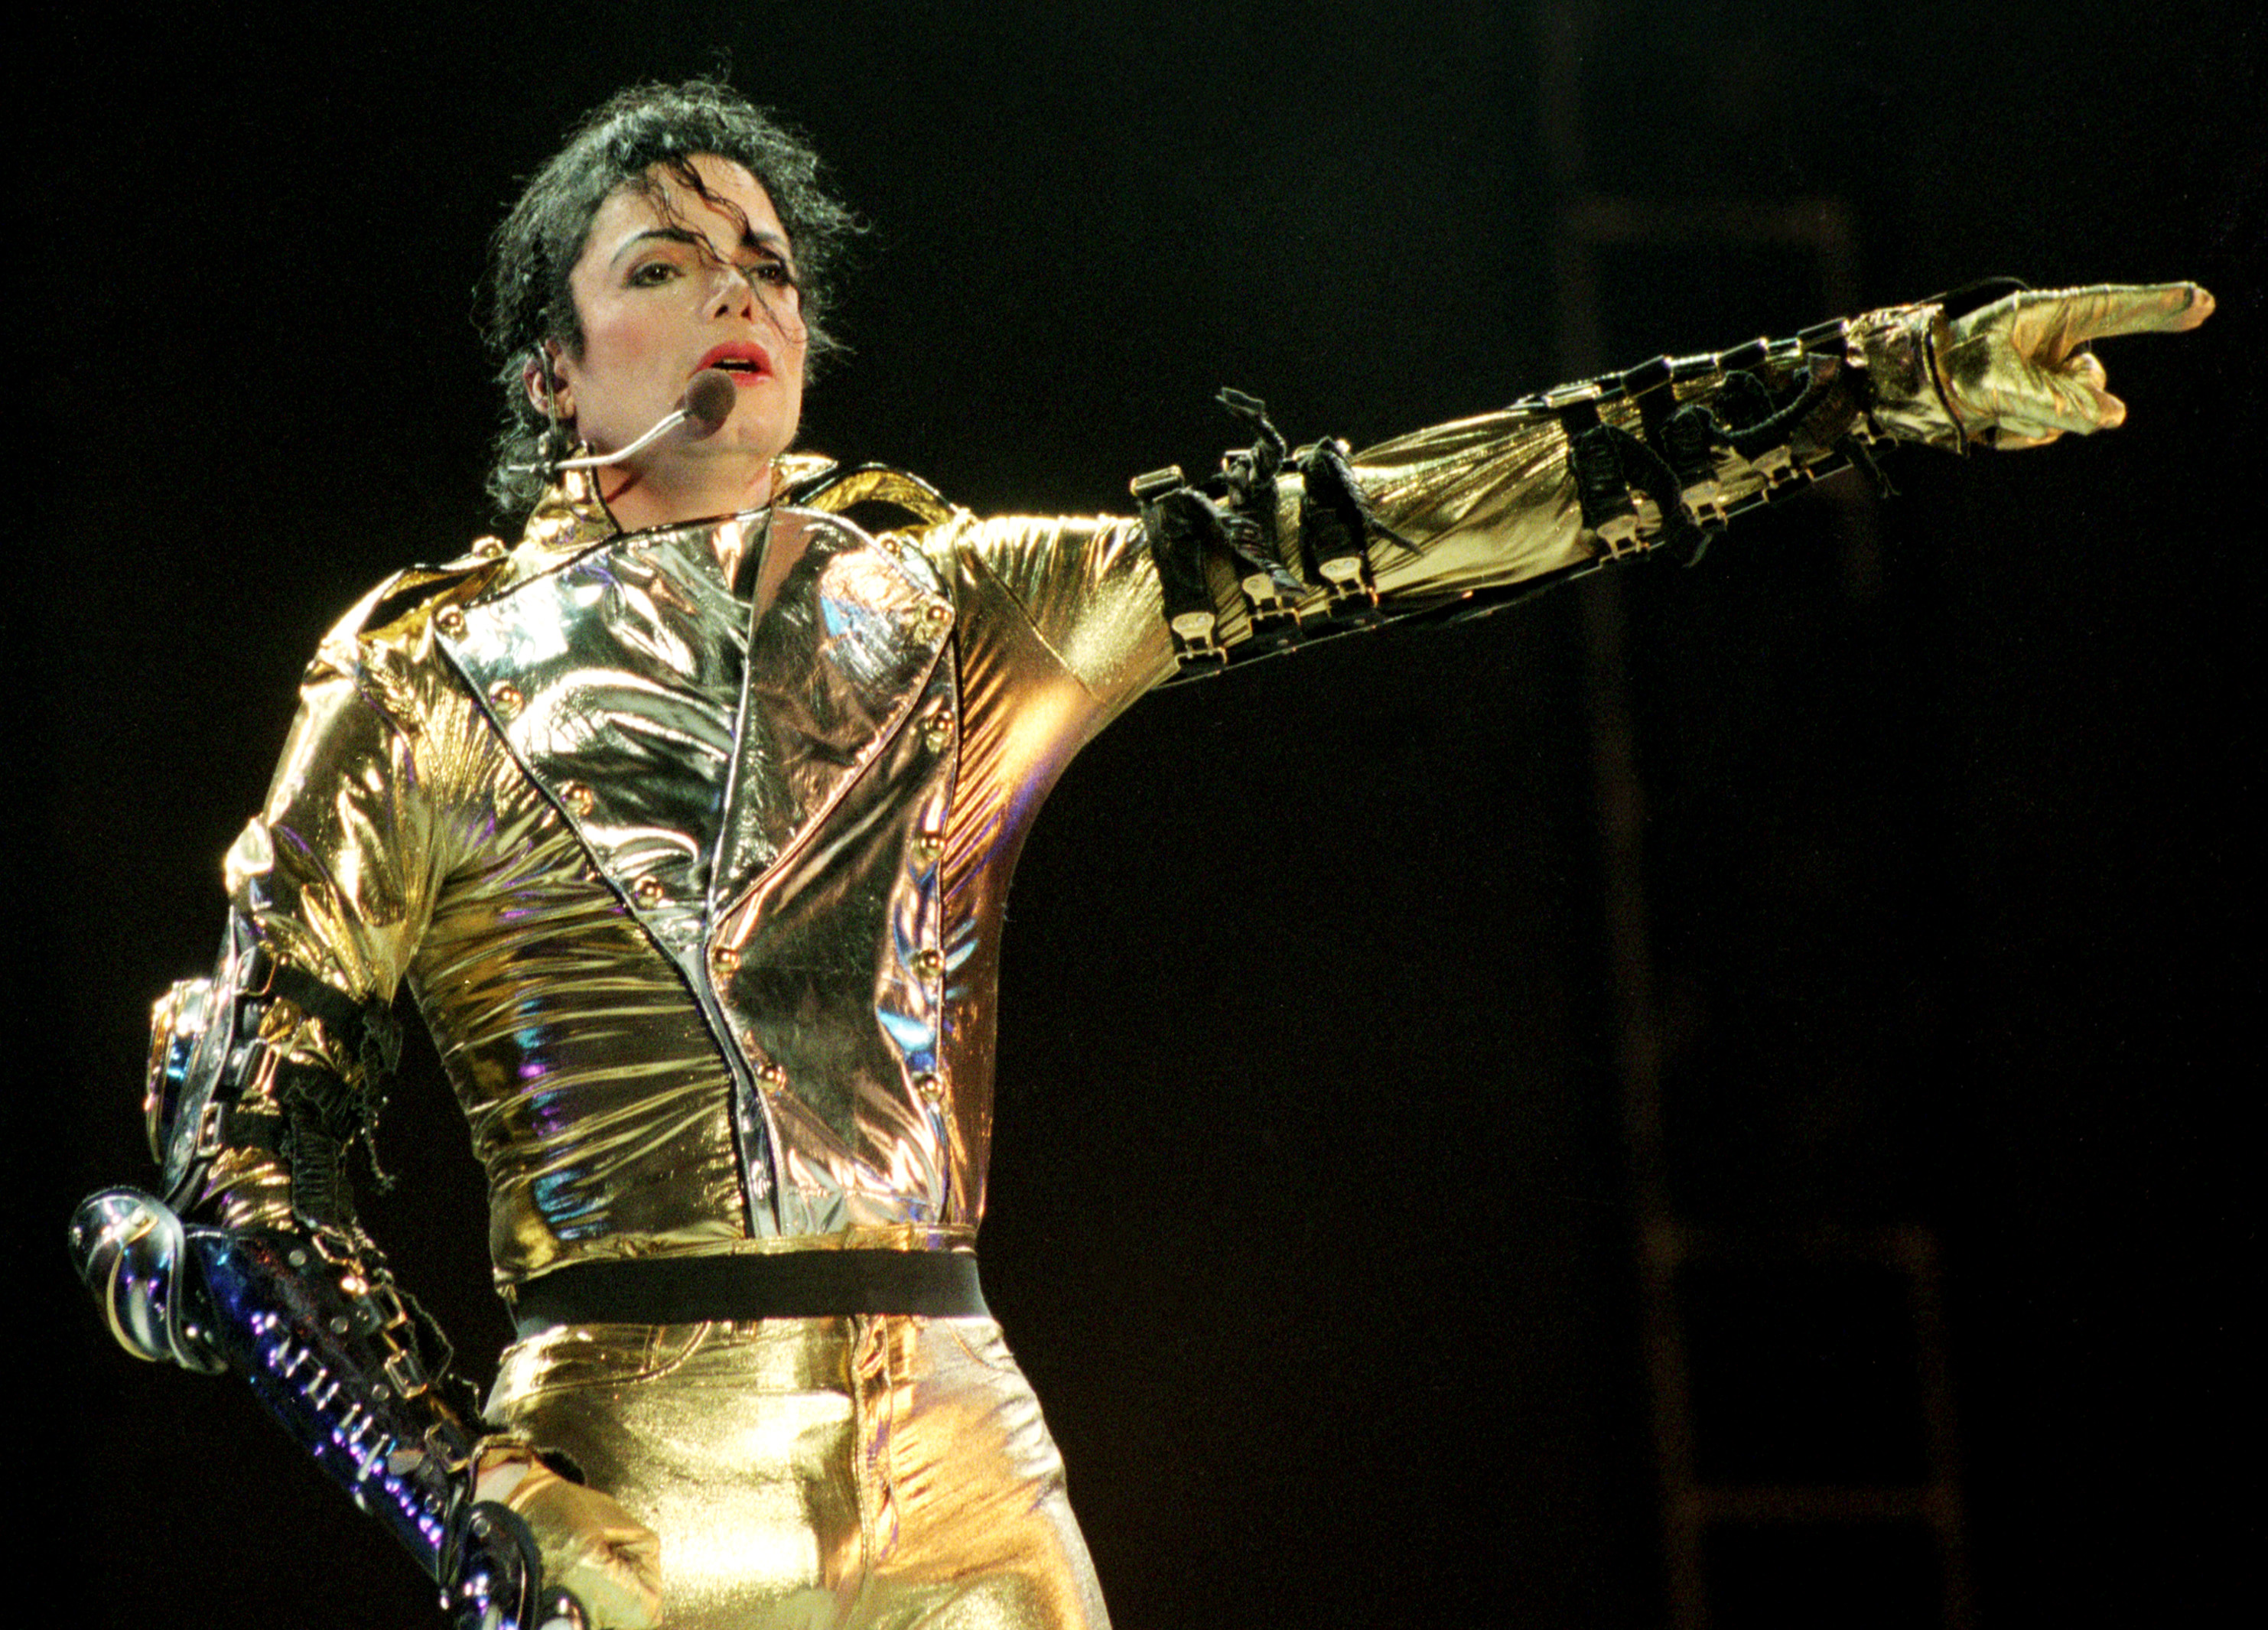 AUCKLAND, NEW ZEALAND - NOVEMBER 10:  Michael Jackson performs on stage during is "HIStory" world tour concert at Ericsson Stadium November 10, 1996 in Auckland, New Zealand. (Photo by Phil Walter/Getty Images)